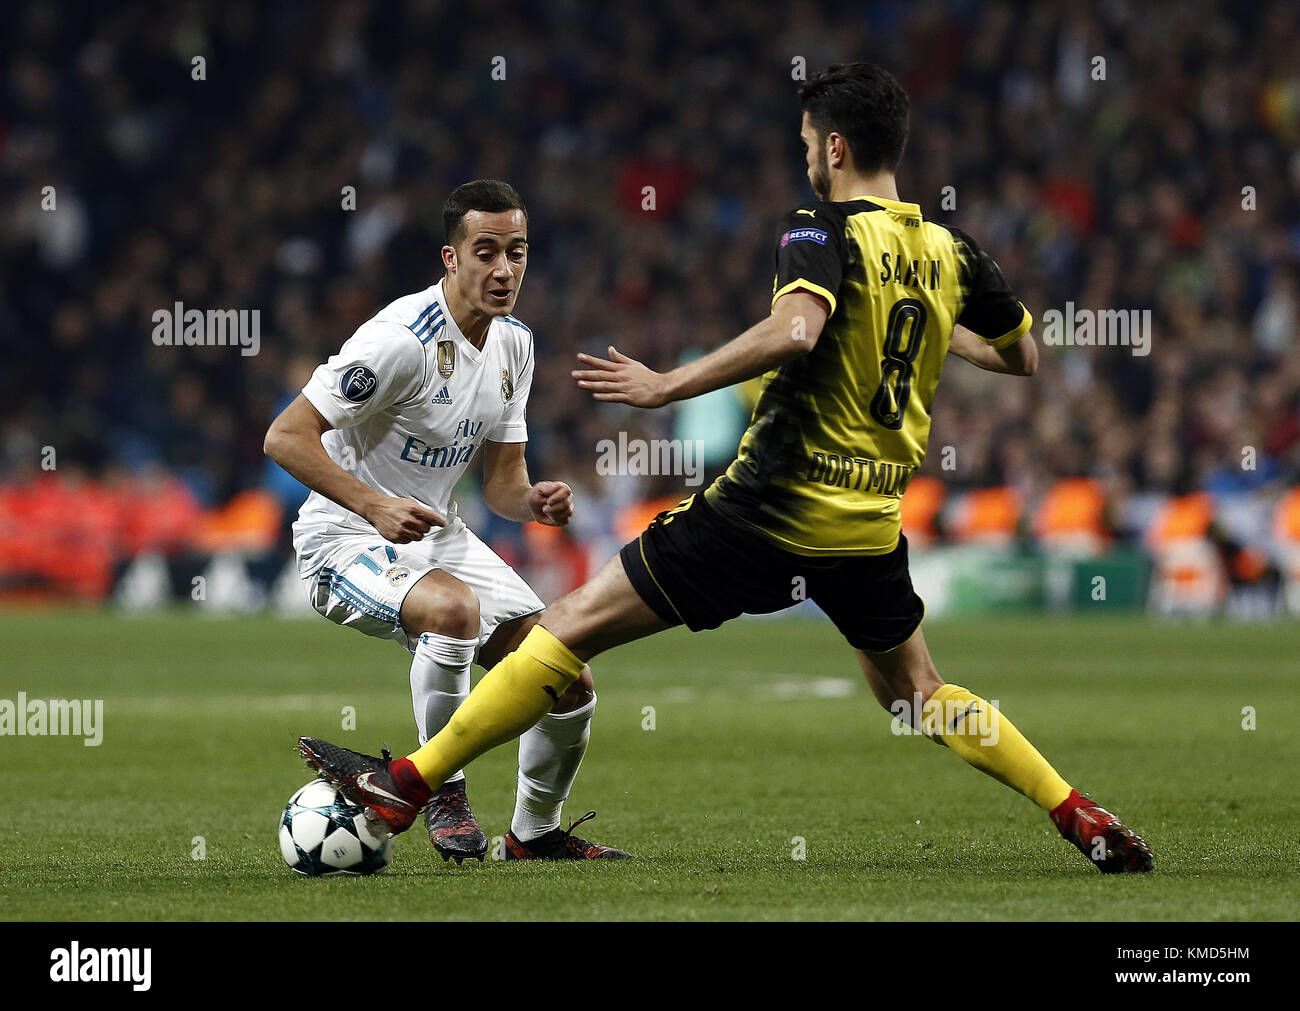 Madrid, Spain. 6th Dec, 2017. Lucas Vazquez of Real Madrid during the UEFA Champions League group H match between Real Madrid and Borussia Dortmund at Santiago Bernabéu. Credit: Manu reino/SOPA/ZUMA Wire/Alamy Live News Stock Photo